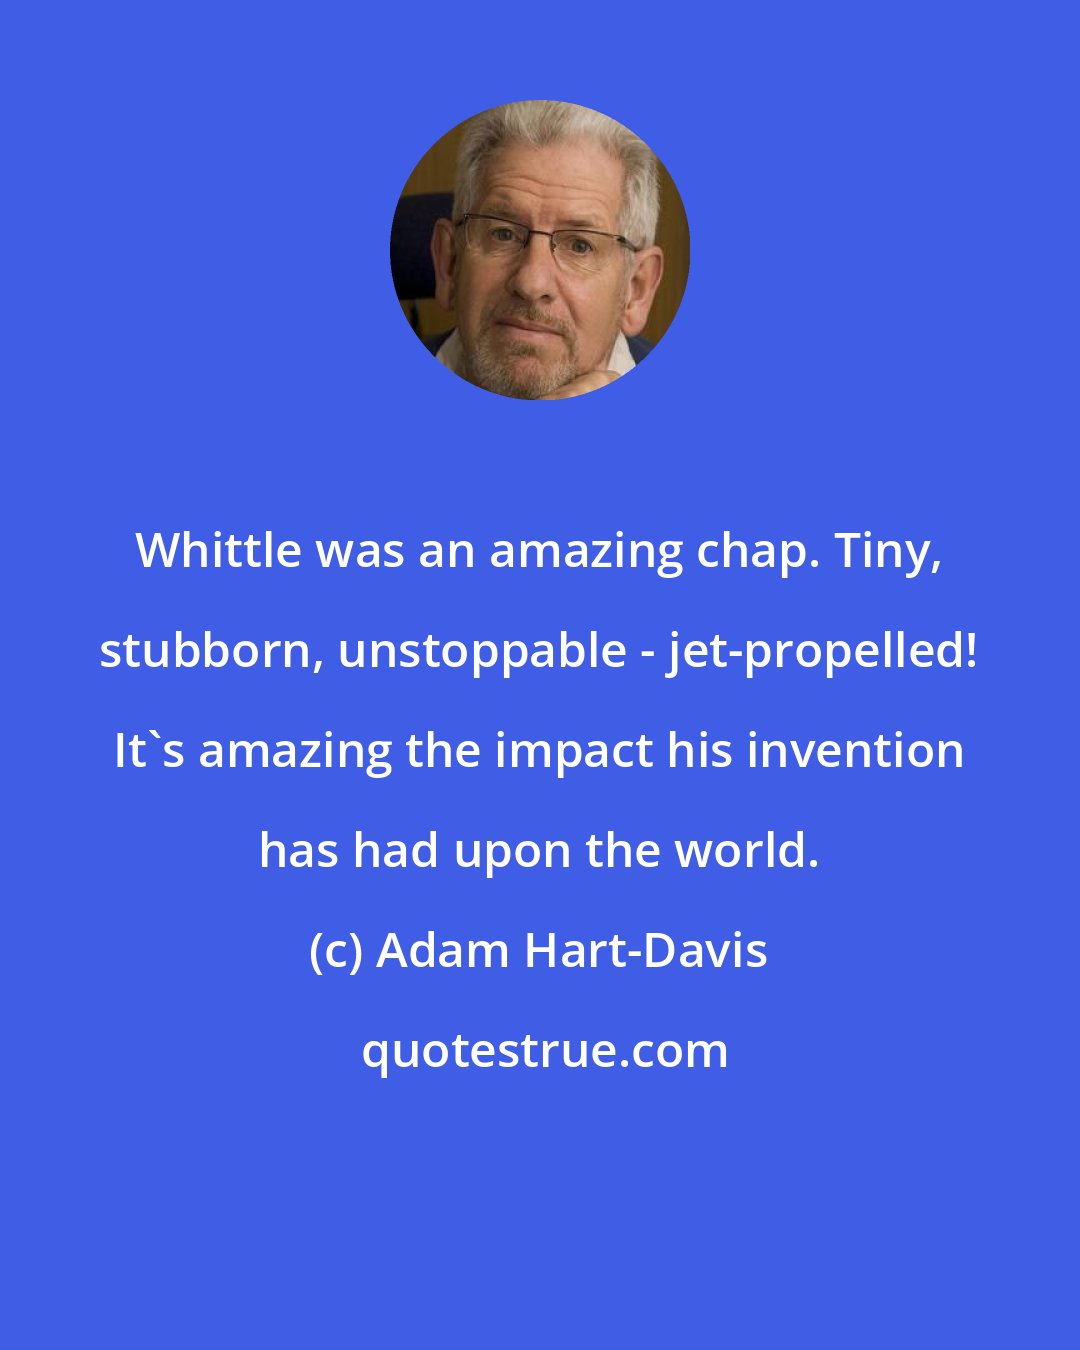 Adam Hart-Davis: Whittle was an amazing chap. Tiny, stubborn, unstoppable - jet-propelled! It's amazing the impact his invention has had upon the world.